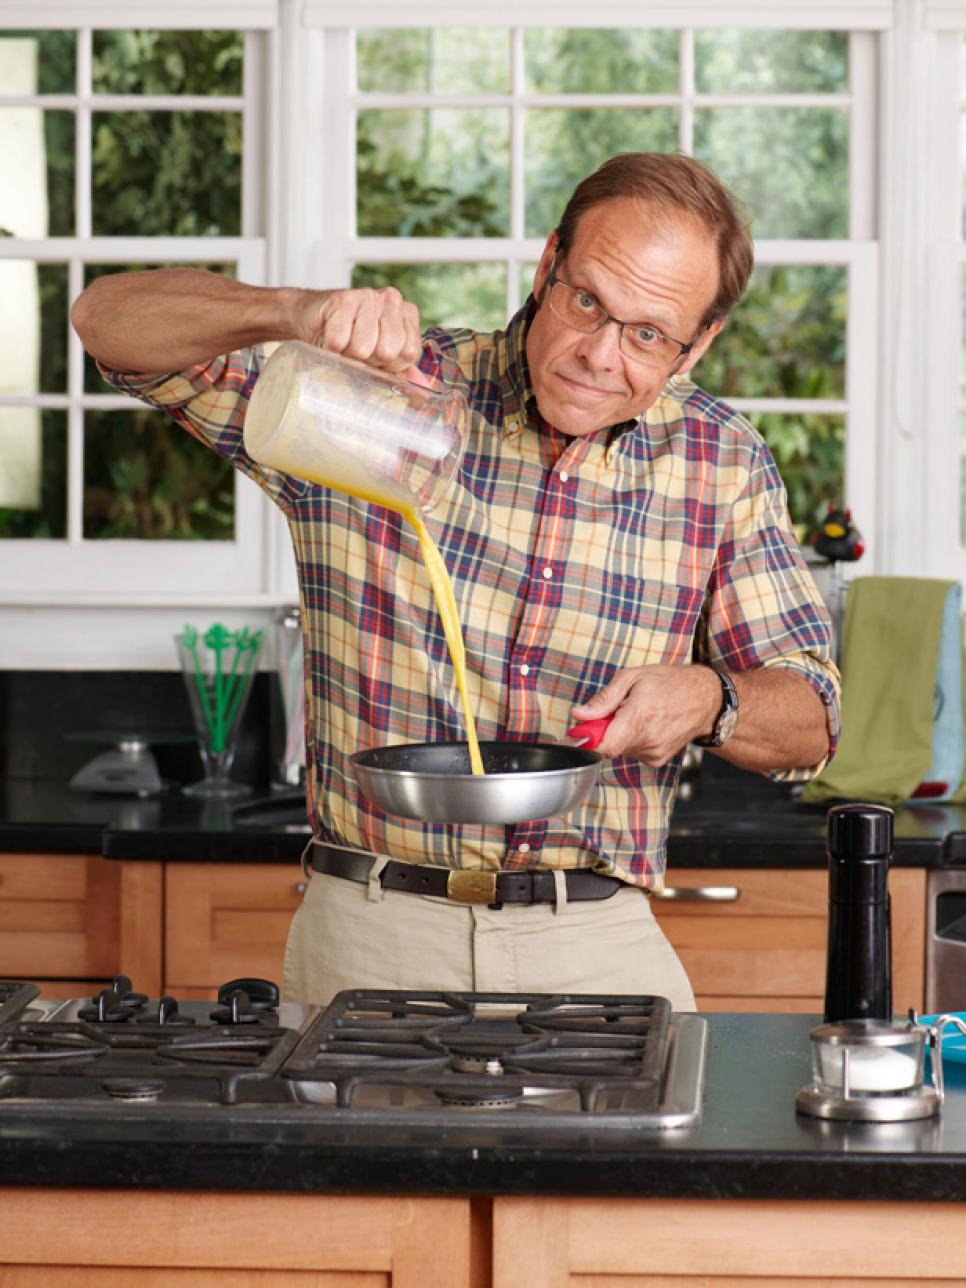 How To Make Scrambled Eggs Like Alton Brown Recipes Dinners And